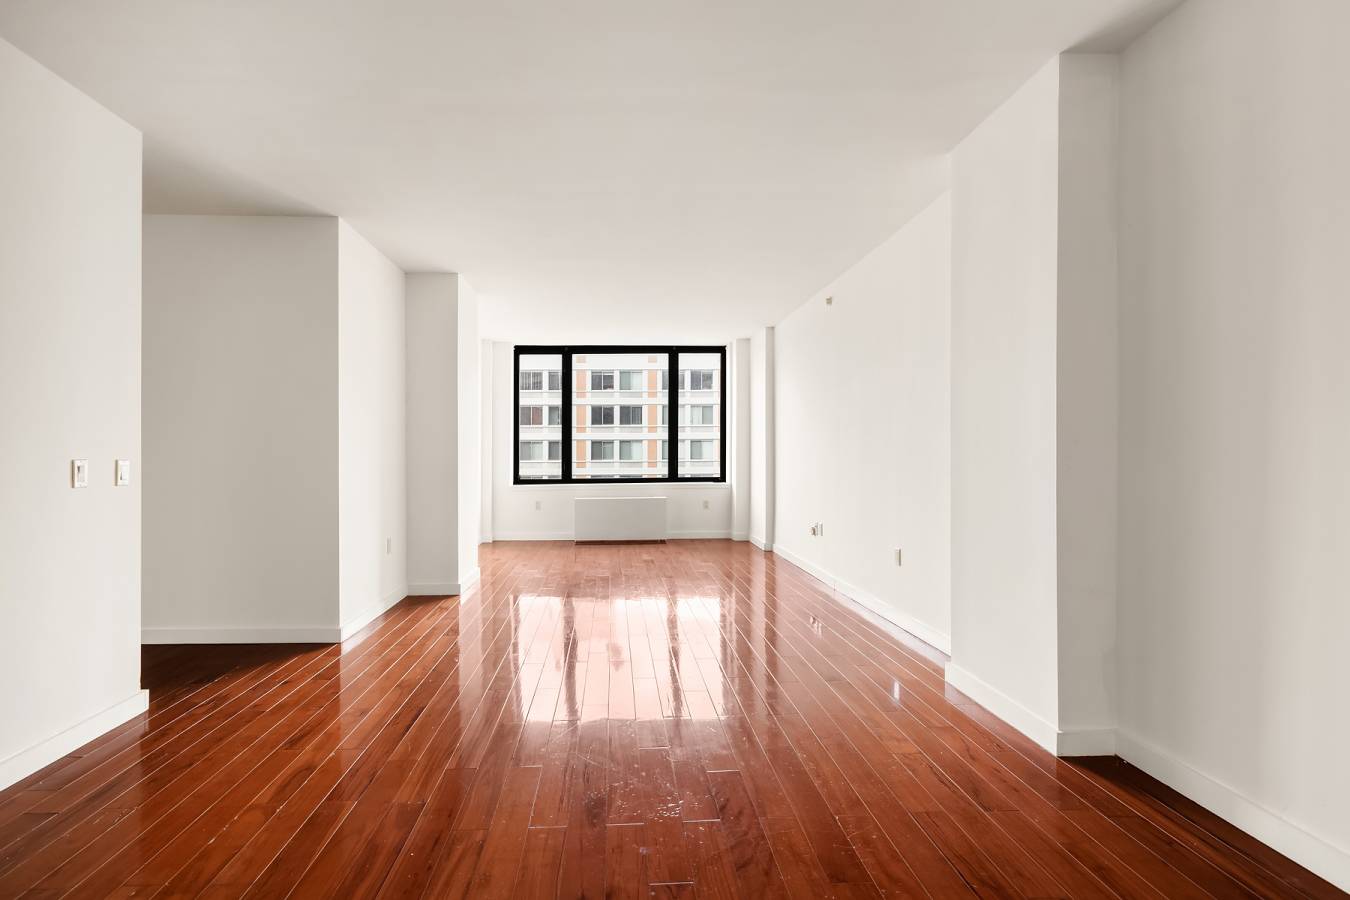 Residence 4E 4E is an amazingly well kept and spacious 2 bedroom, 2 bathroom apartment in prime Harlem.